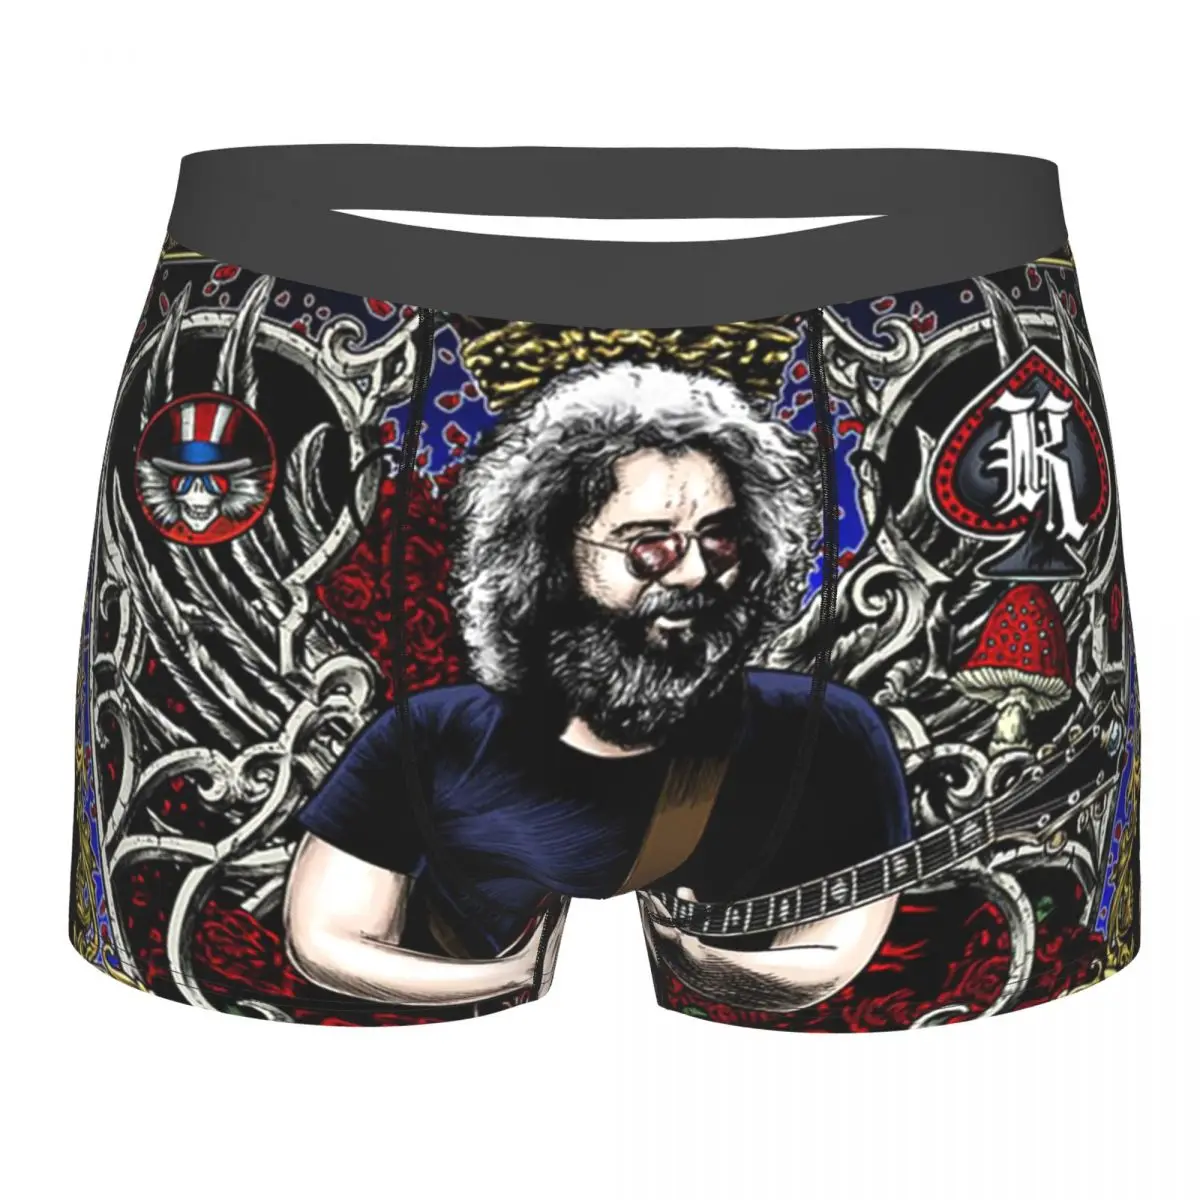 Jerry Card,Play The King Jerry Card Underpants Breathbale Panties Male Underwear Print Shorts Boxer Briefs